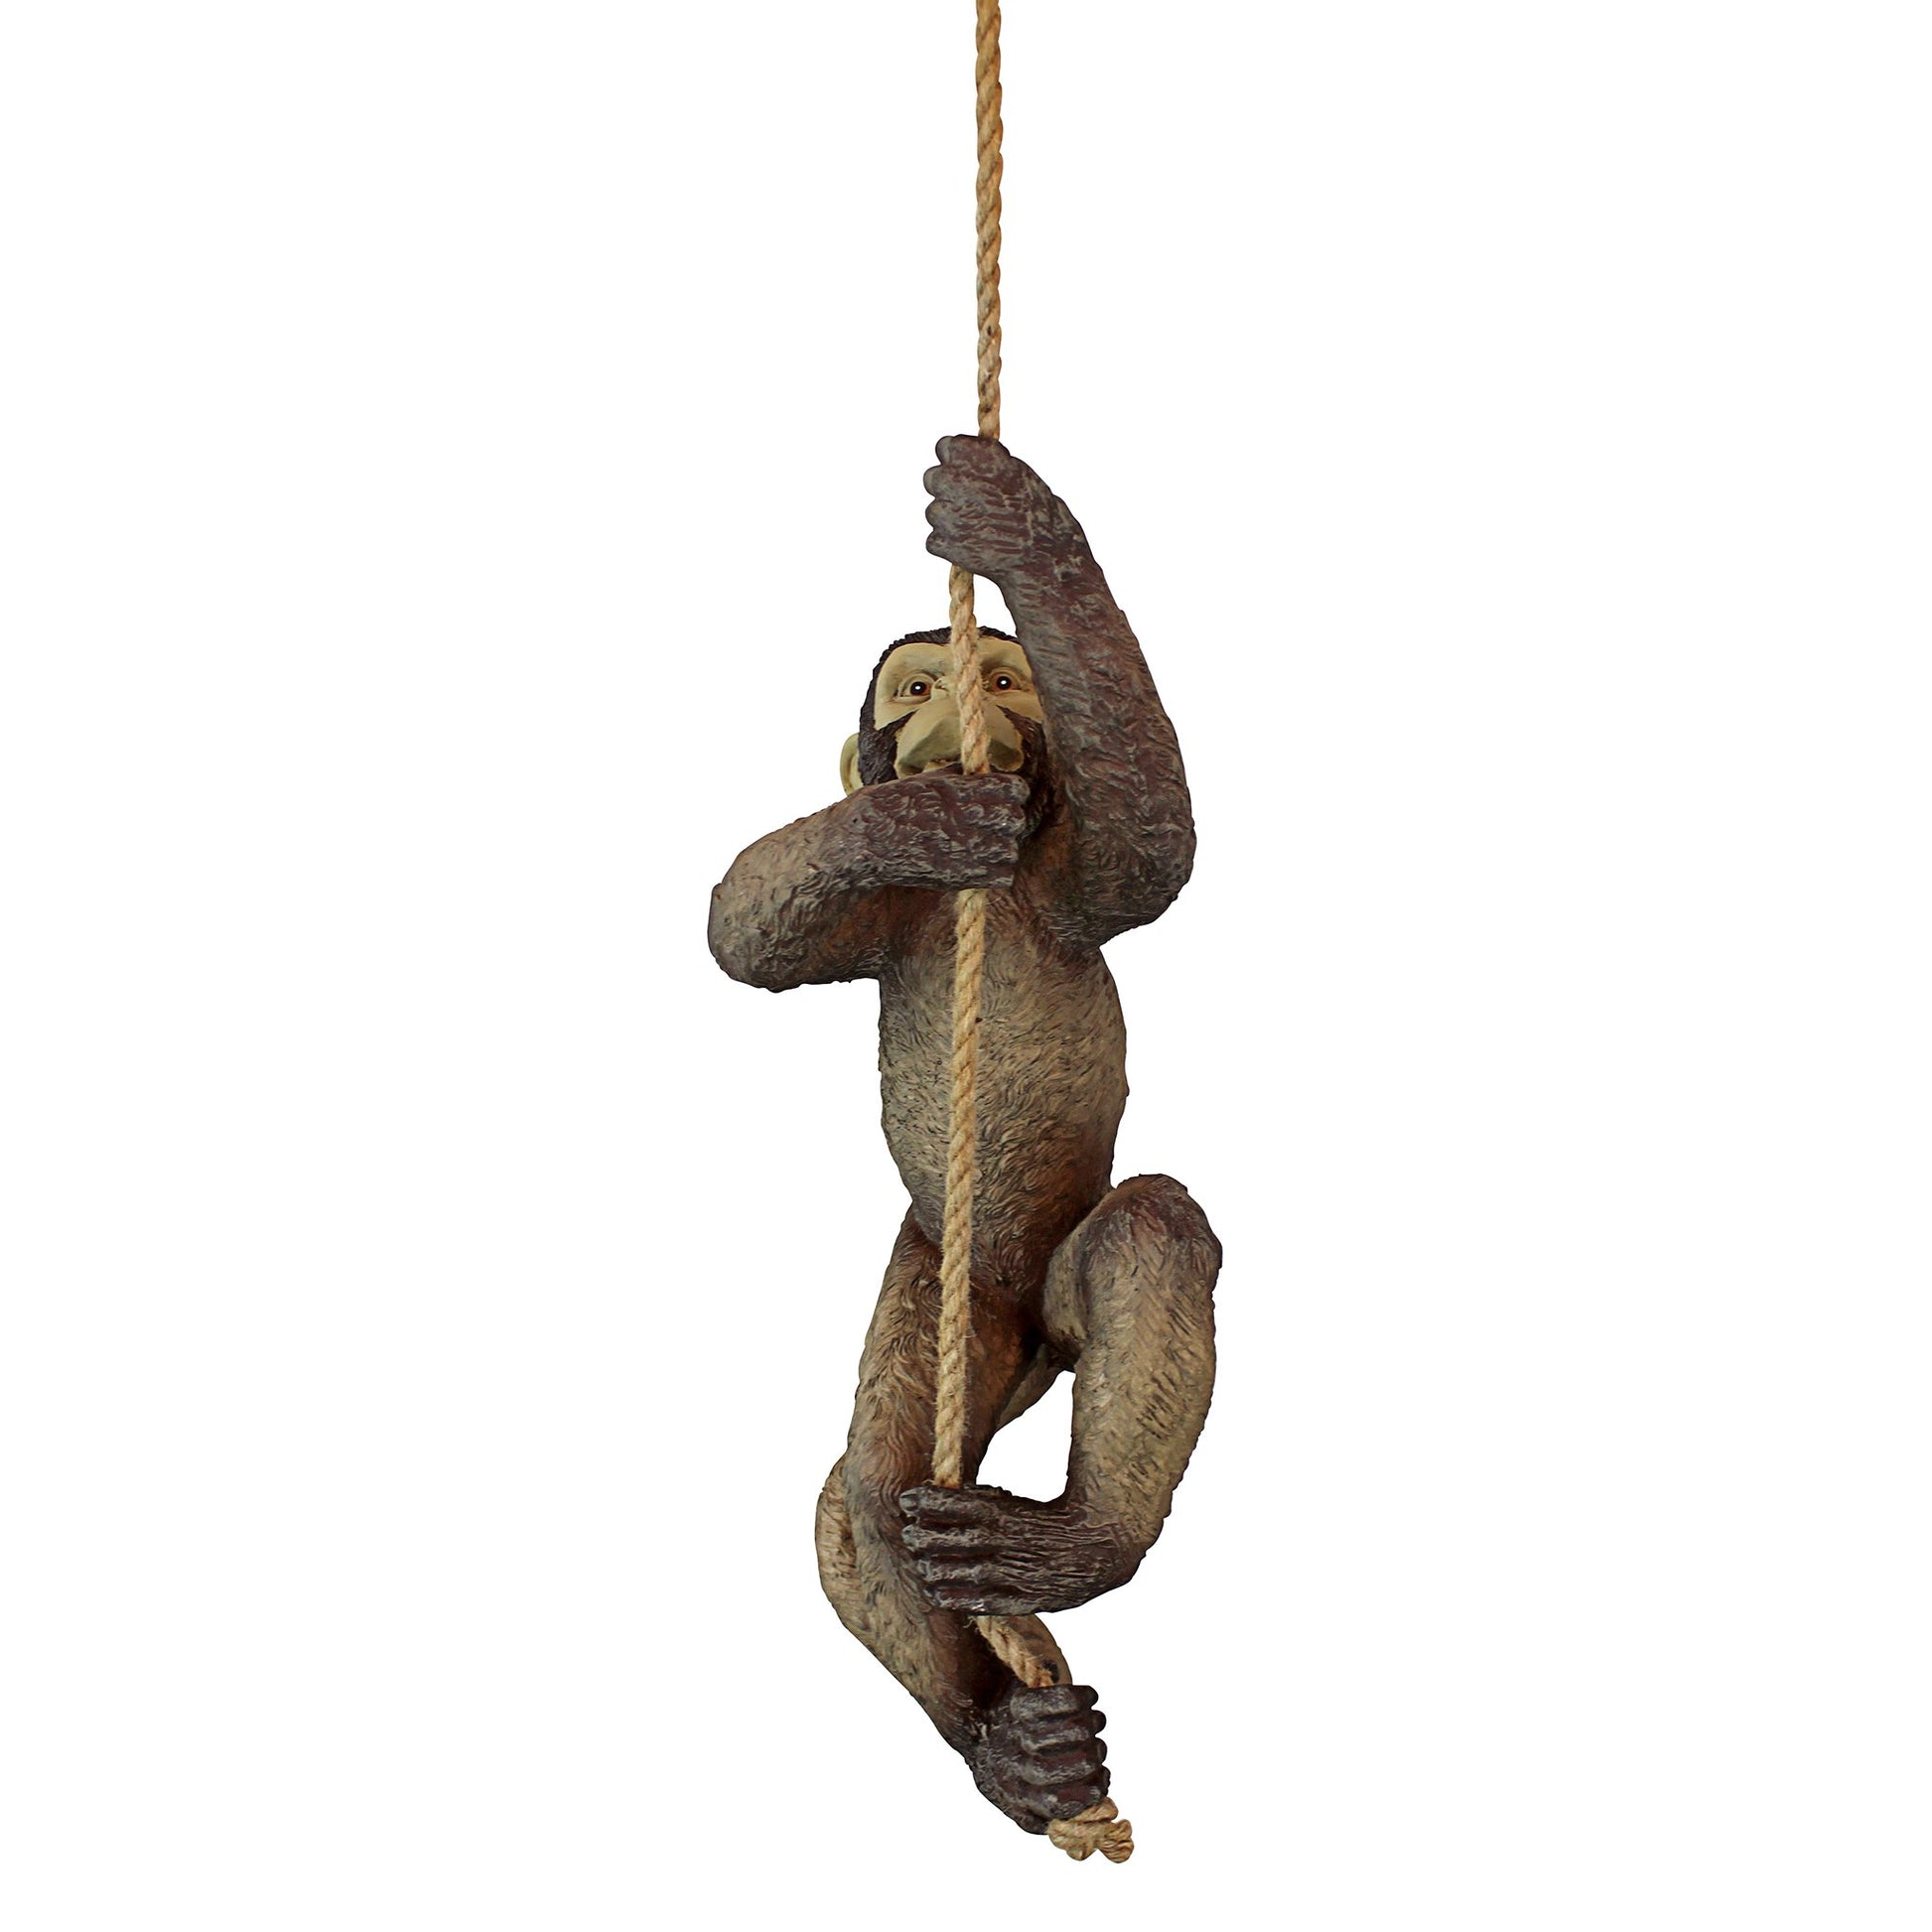 Front view of a fake monkey made from resin climbing up a rope on a white background